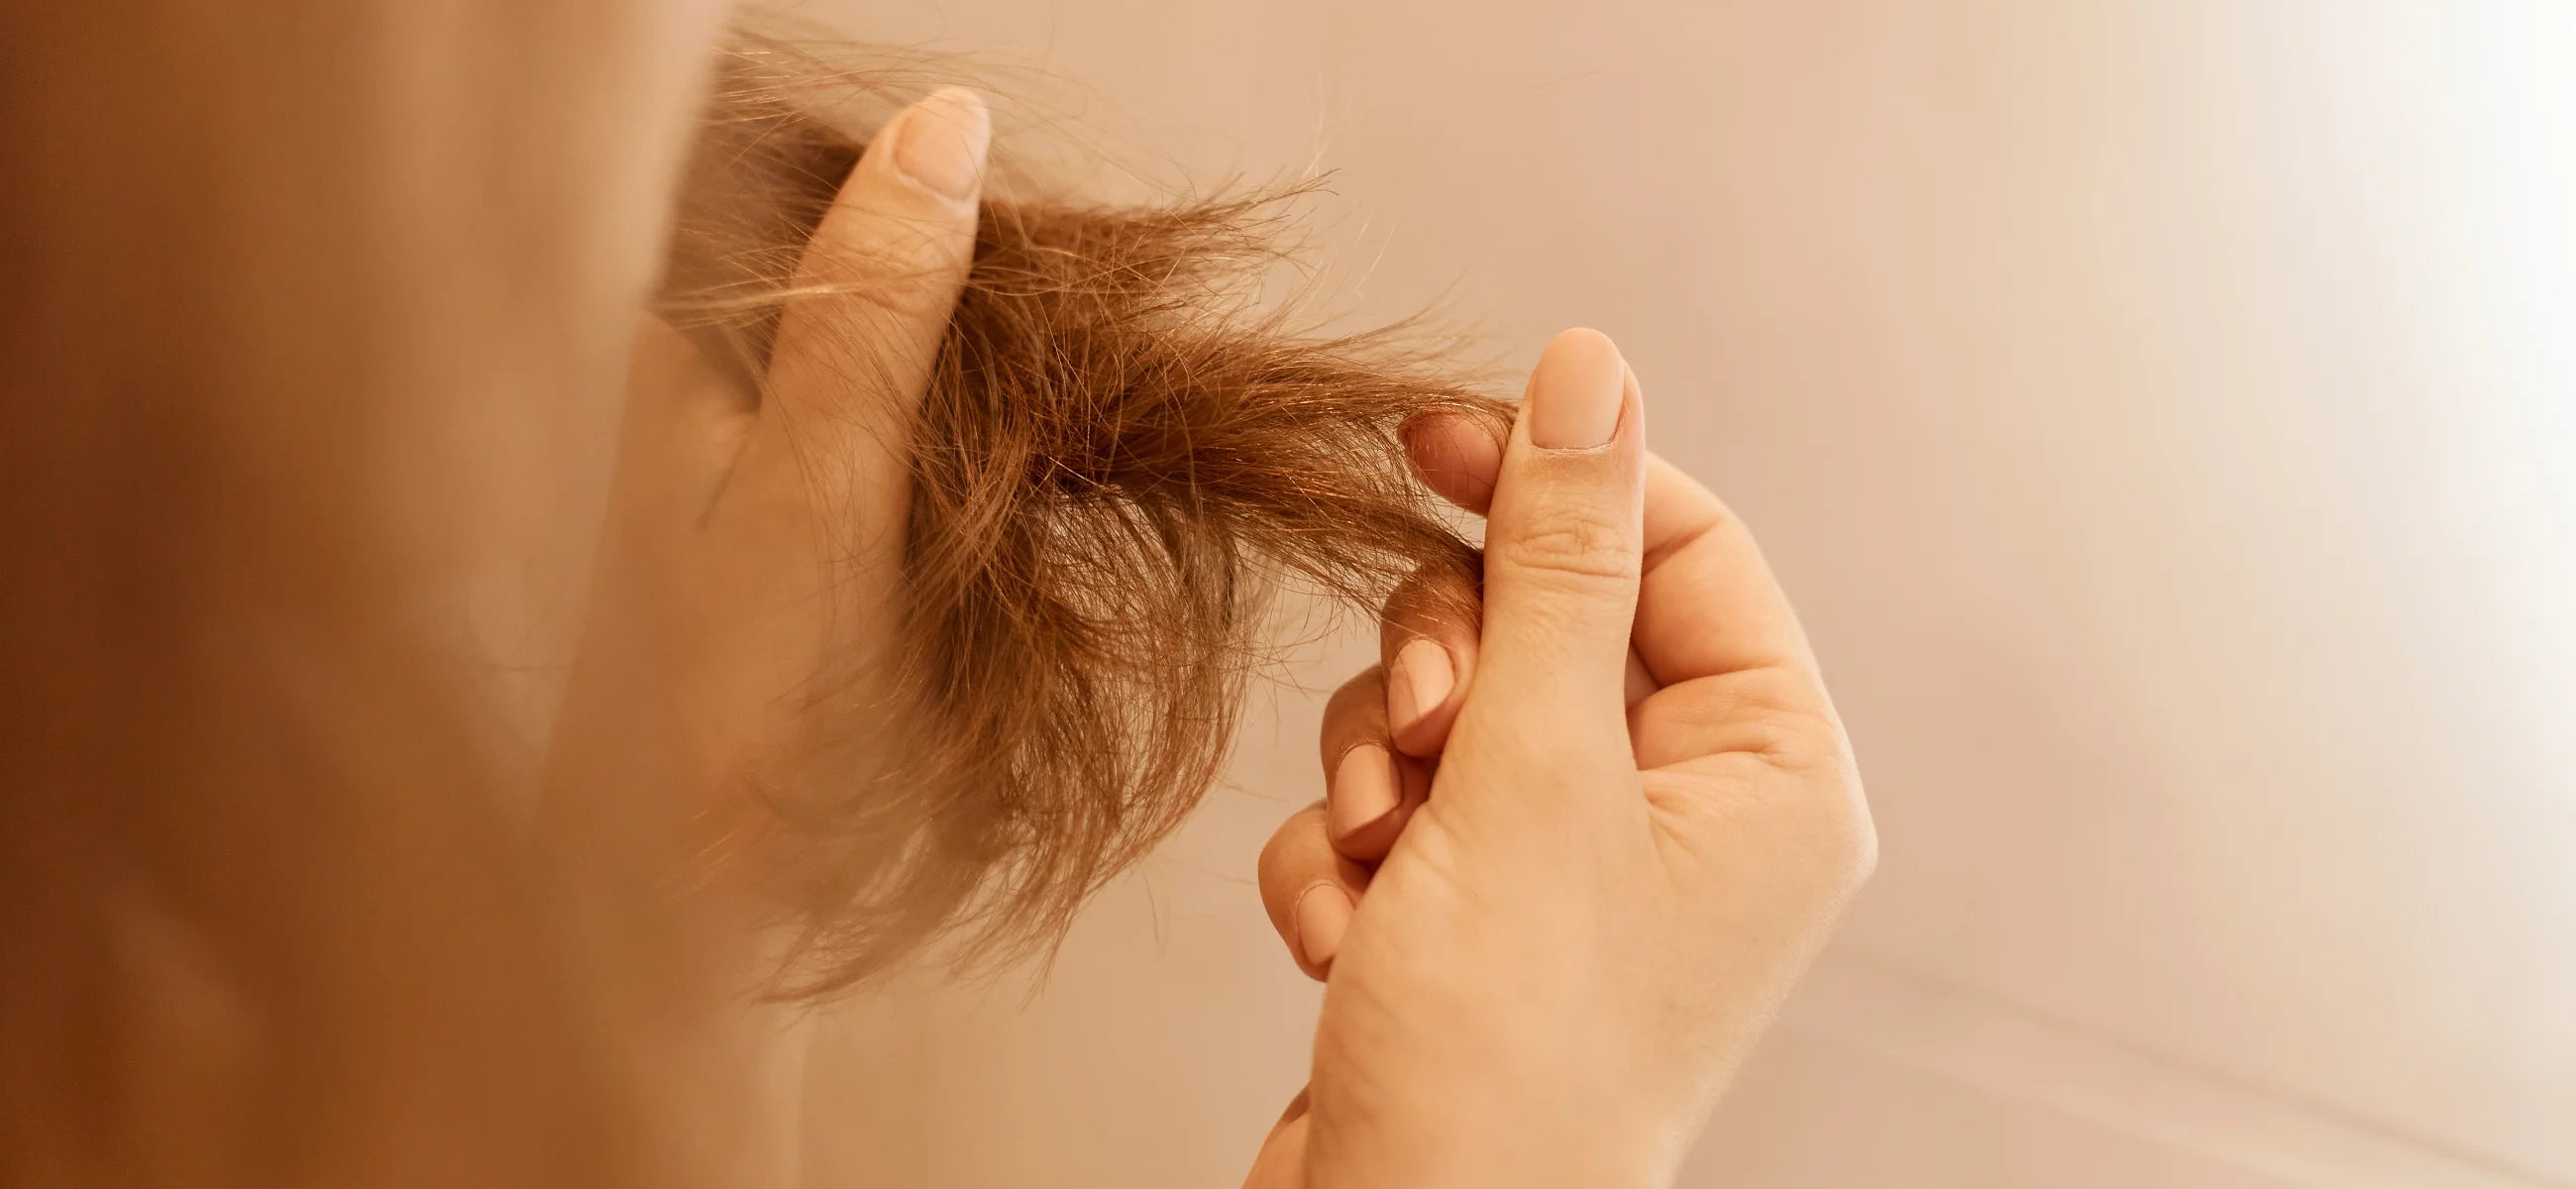 15 best home remedies for dry hair